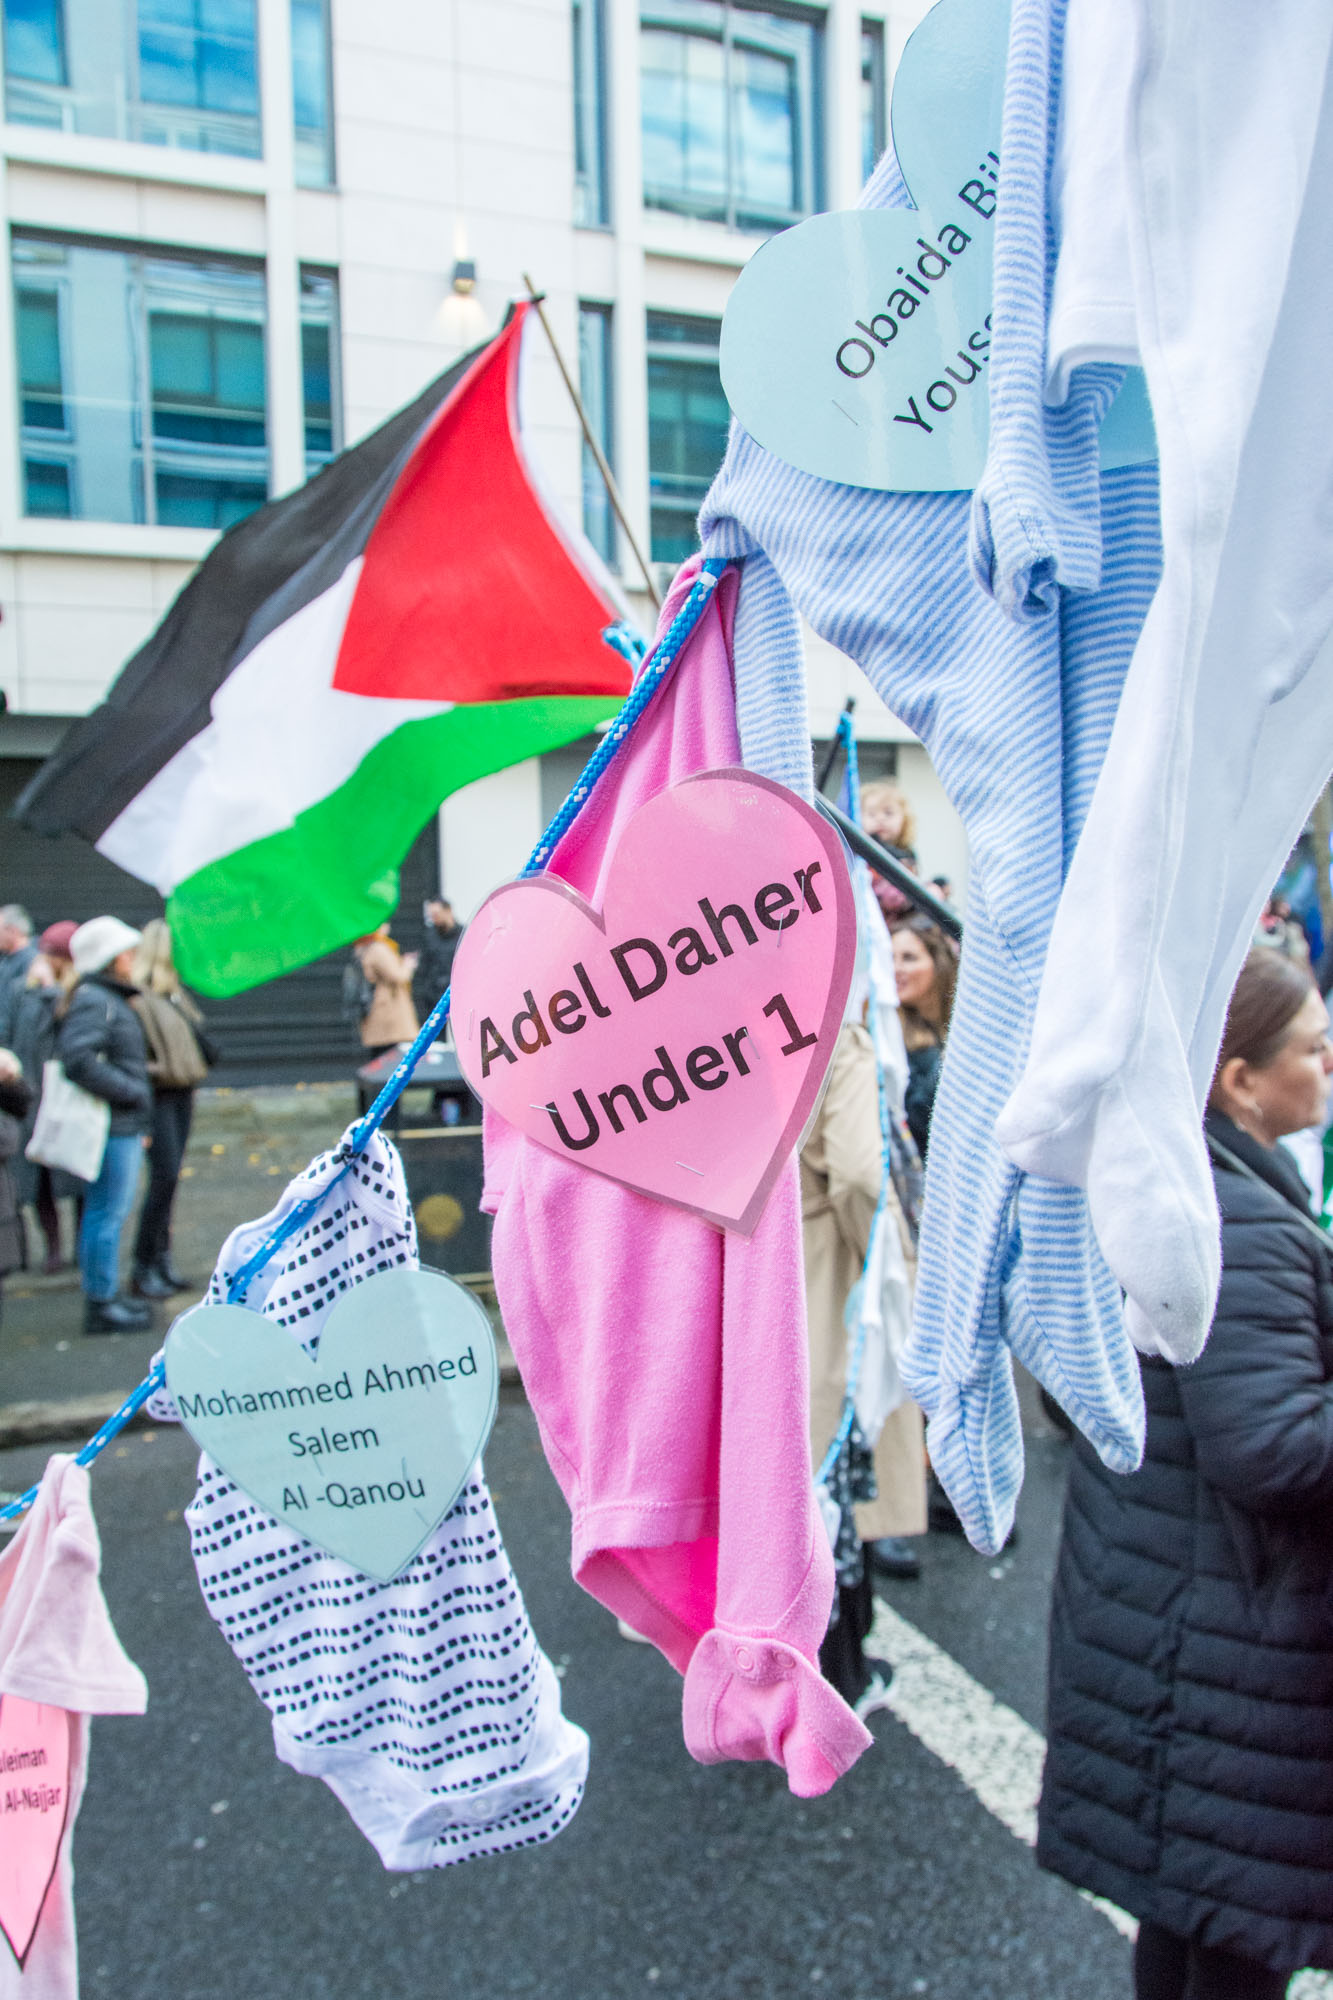 Hearts on baby clothes containing the names of children killed during the ongoing war in Palestine hung as if on washing lines at the Palestine march in Belfast. Photo 7709 by Stephen S T Bradley